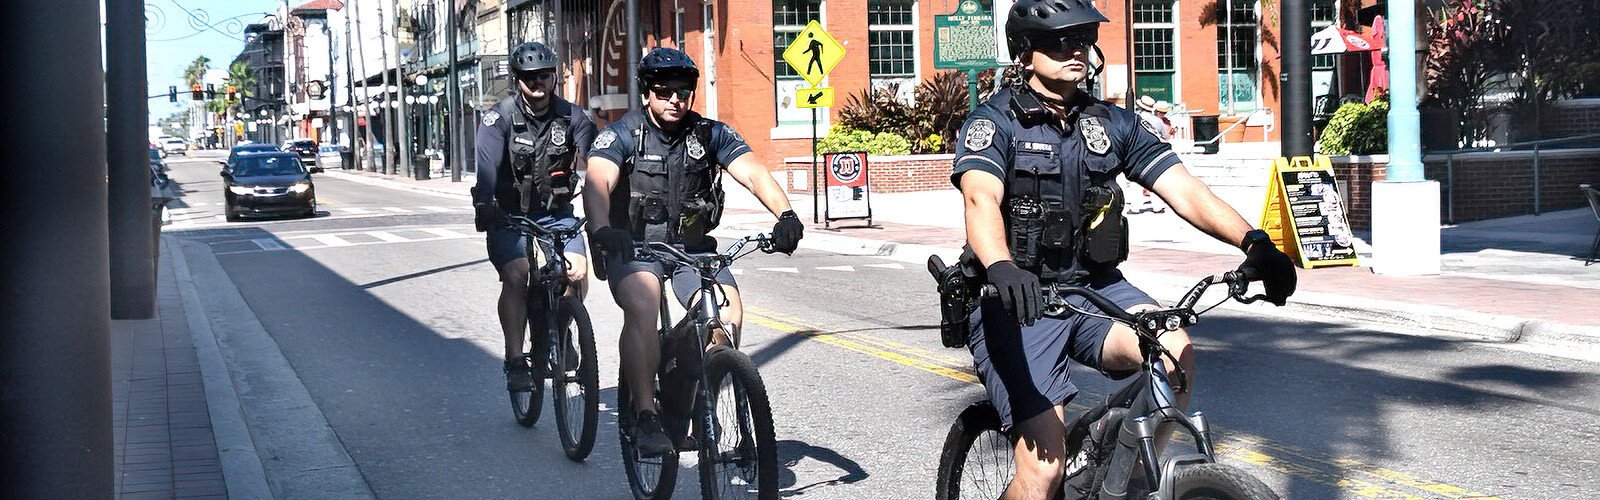 Following World Car-Free Day guidelines, three police officers patrol on bicycle down Seventh Avenue in Ybor City on the morning of Saturday, September 23rd.